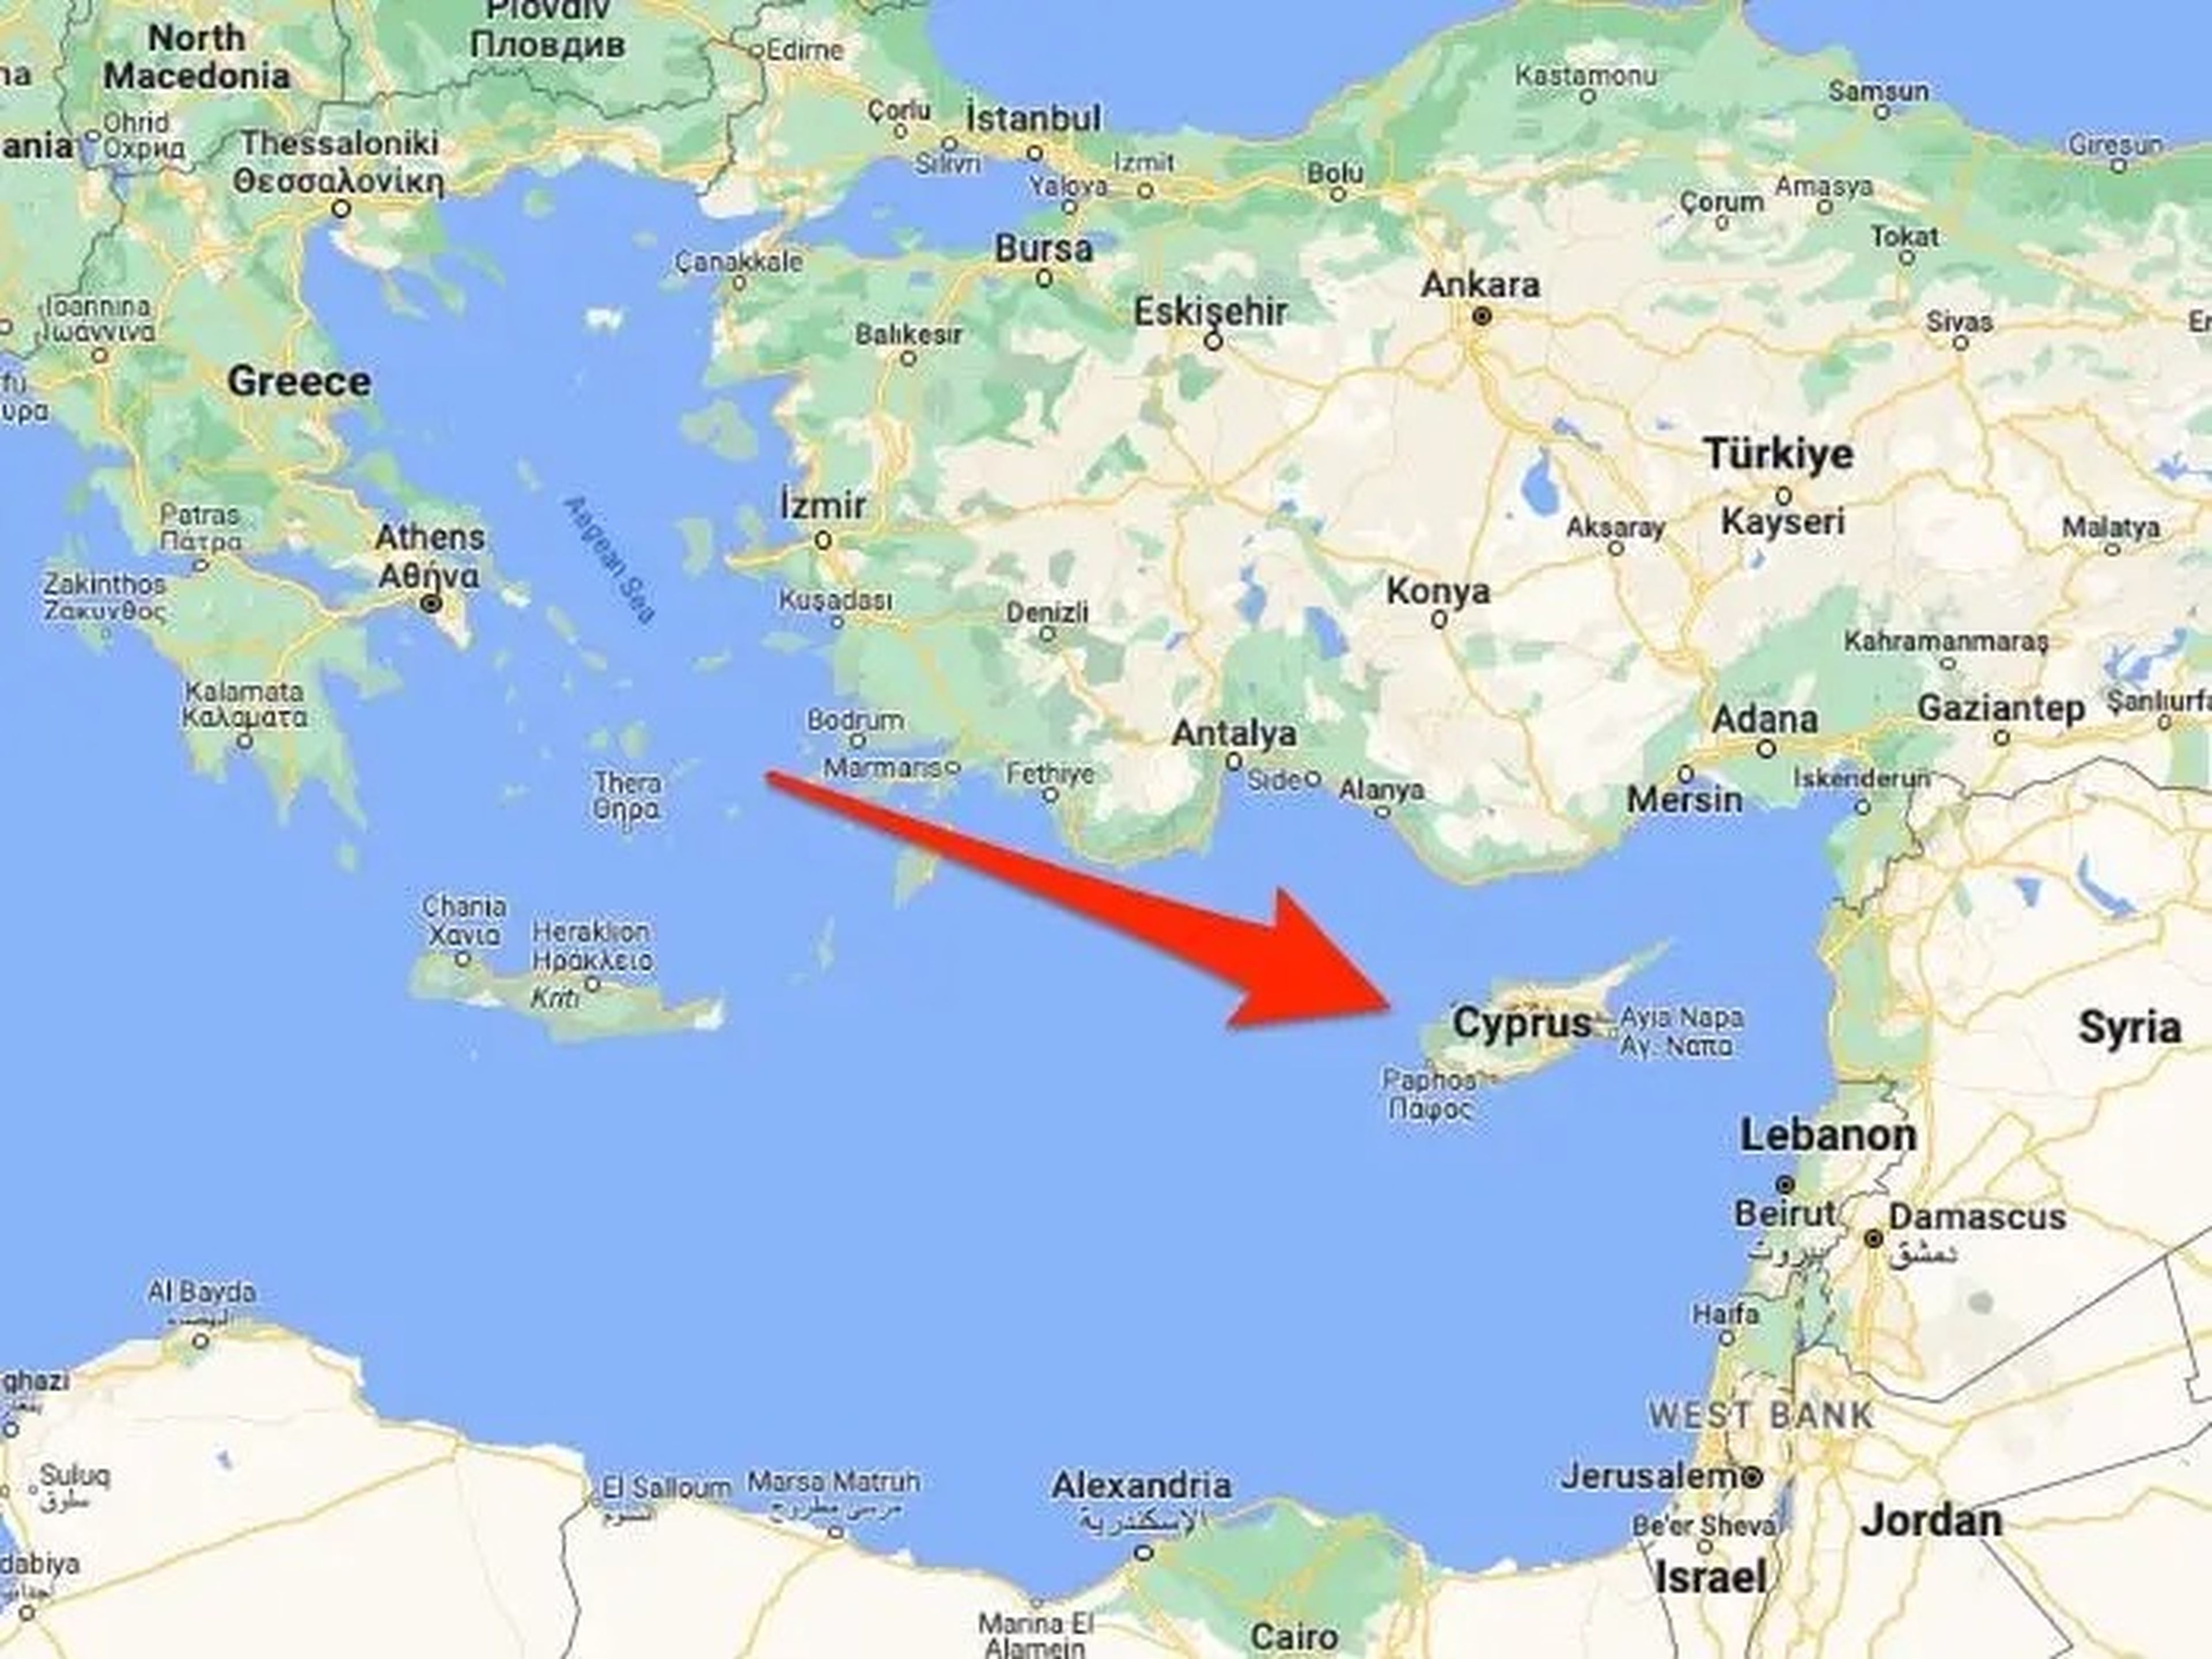 A screengrab of Google Maps shows the area surrounding the island nation of Cyprus in the Mediterranean. A red arrow points to Cyprus on the map.